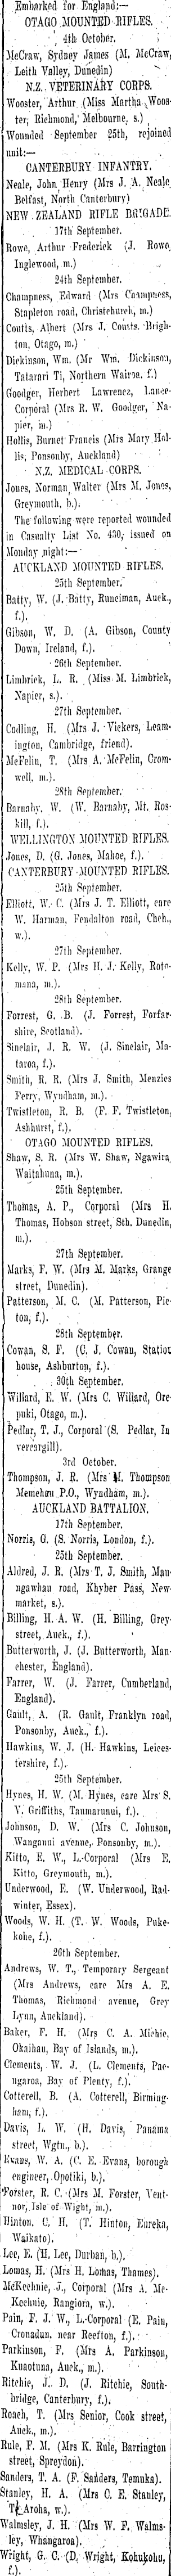 Papers Past Newspapers North Otago Times 18 October 1916 Roll Of Honour